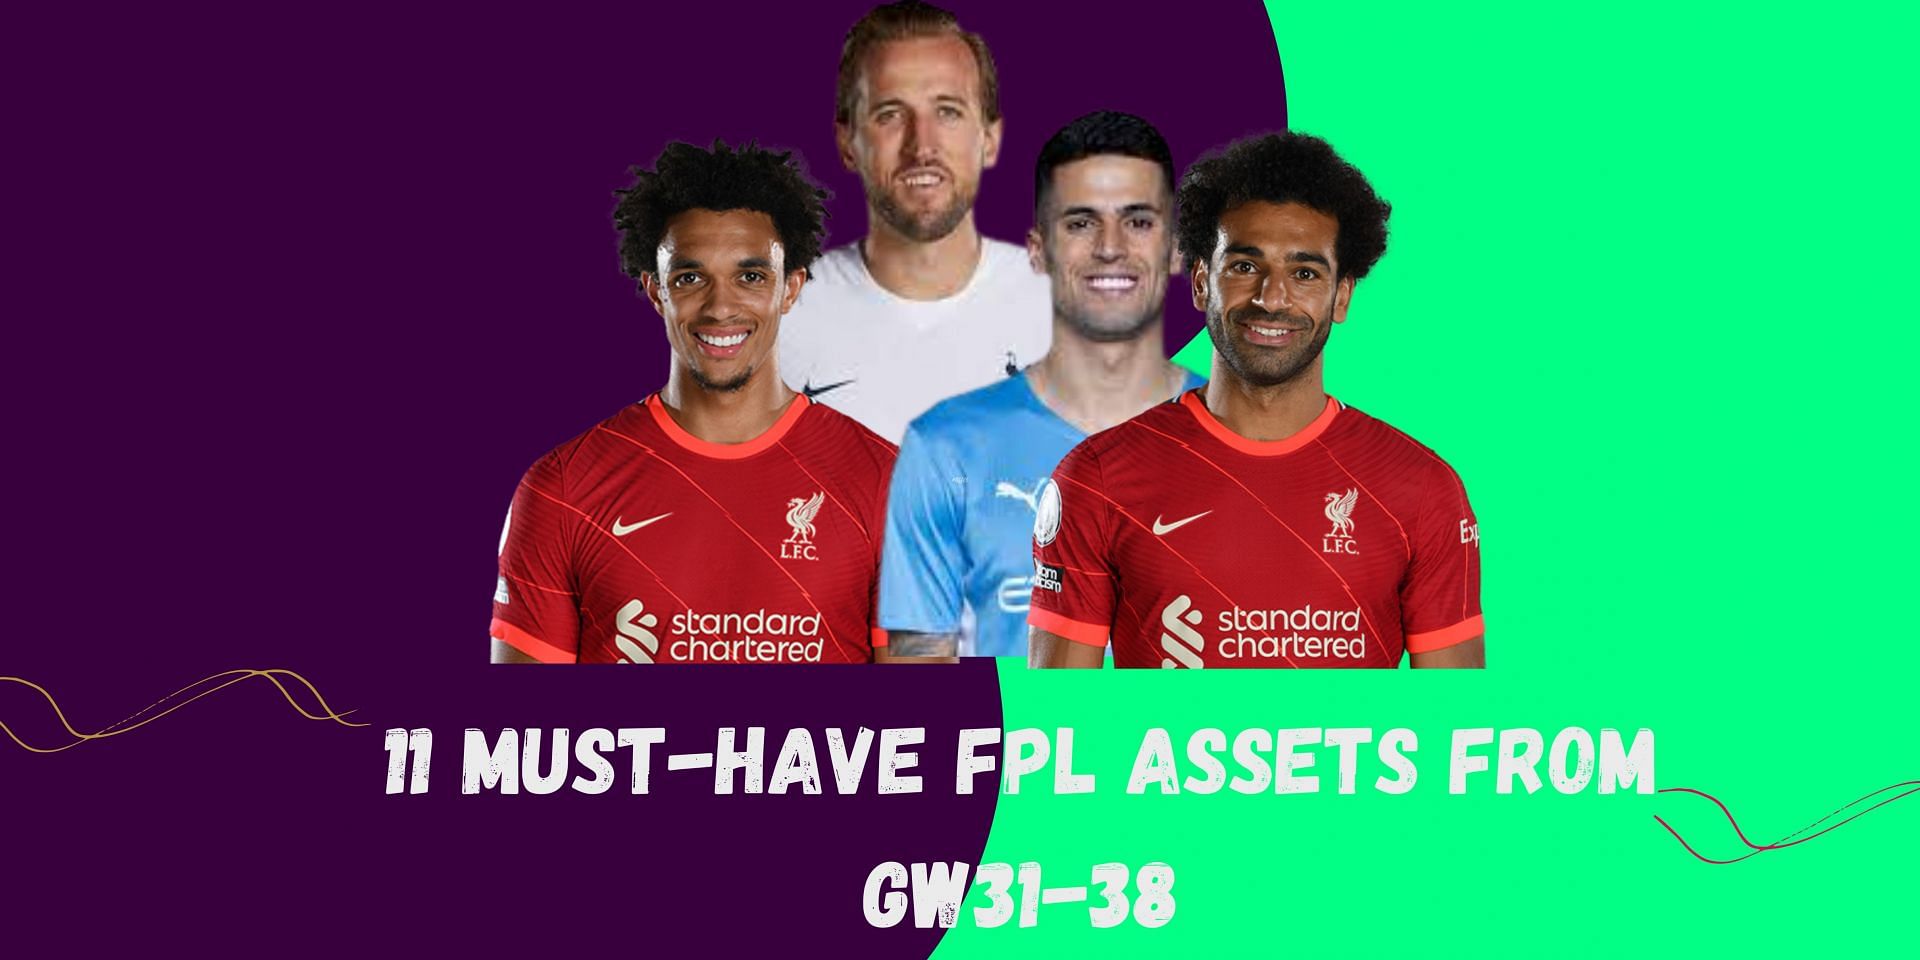 11 must-have FPL assets from GW31-38